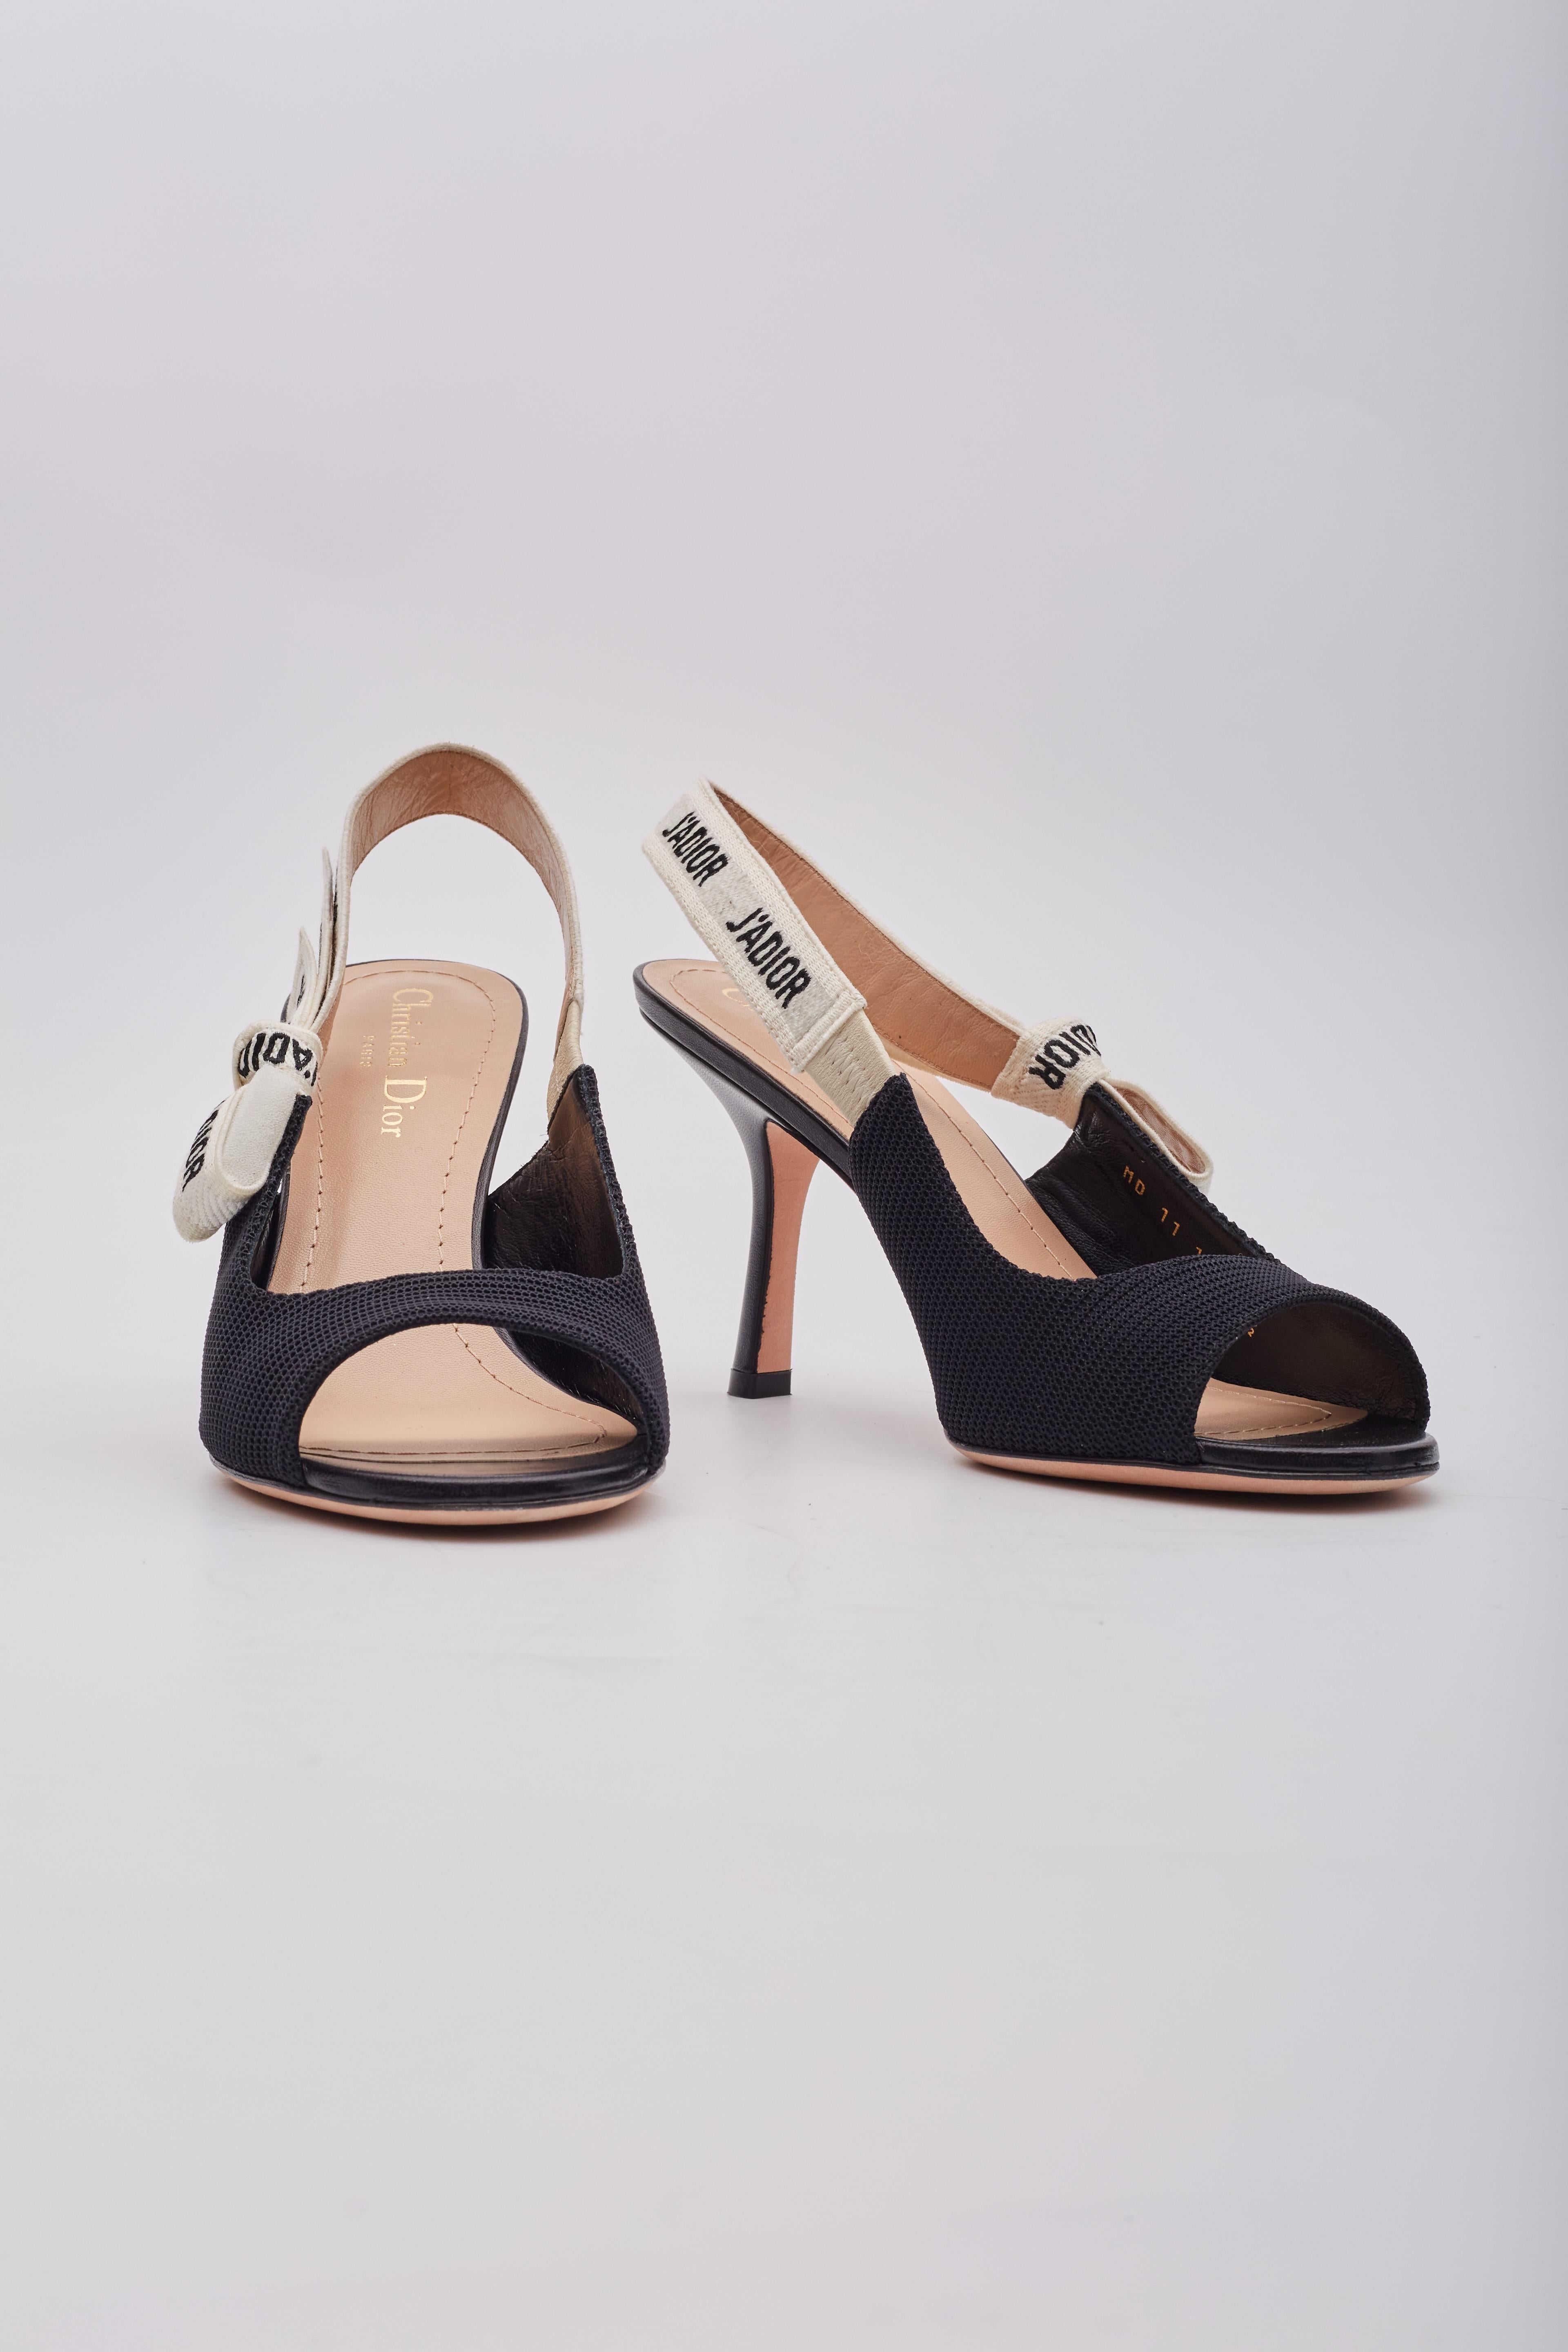 The J'Adior slingback pumps are crafted in the Italian ateliers of black technical fabric. The heels features a two-tone 'J'Adior' cotton ribbon with a bow embellishment, a 90mm heel height, a leather sole with a star motif and the brands lucky